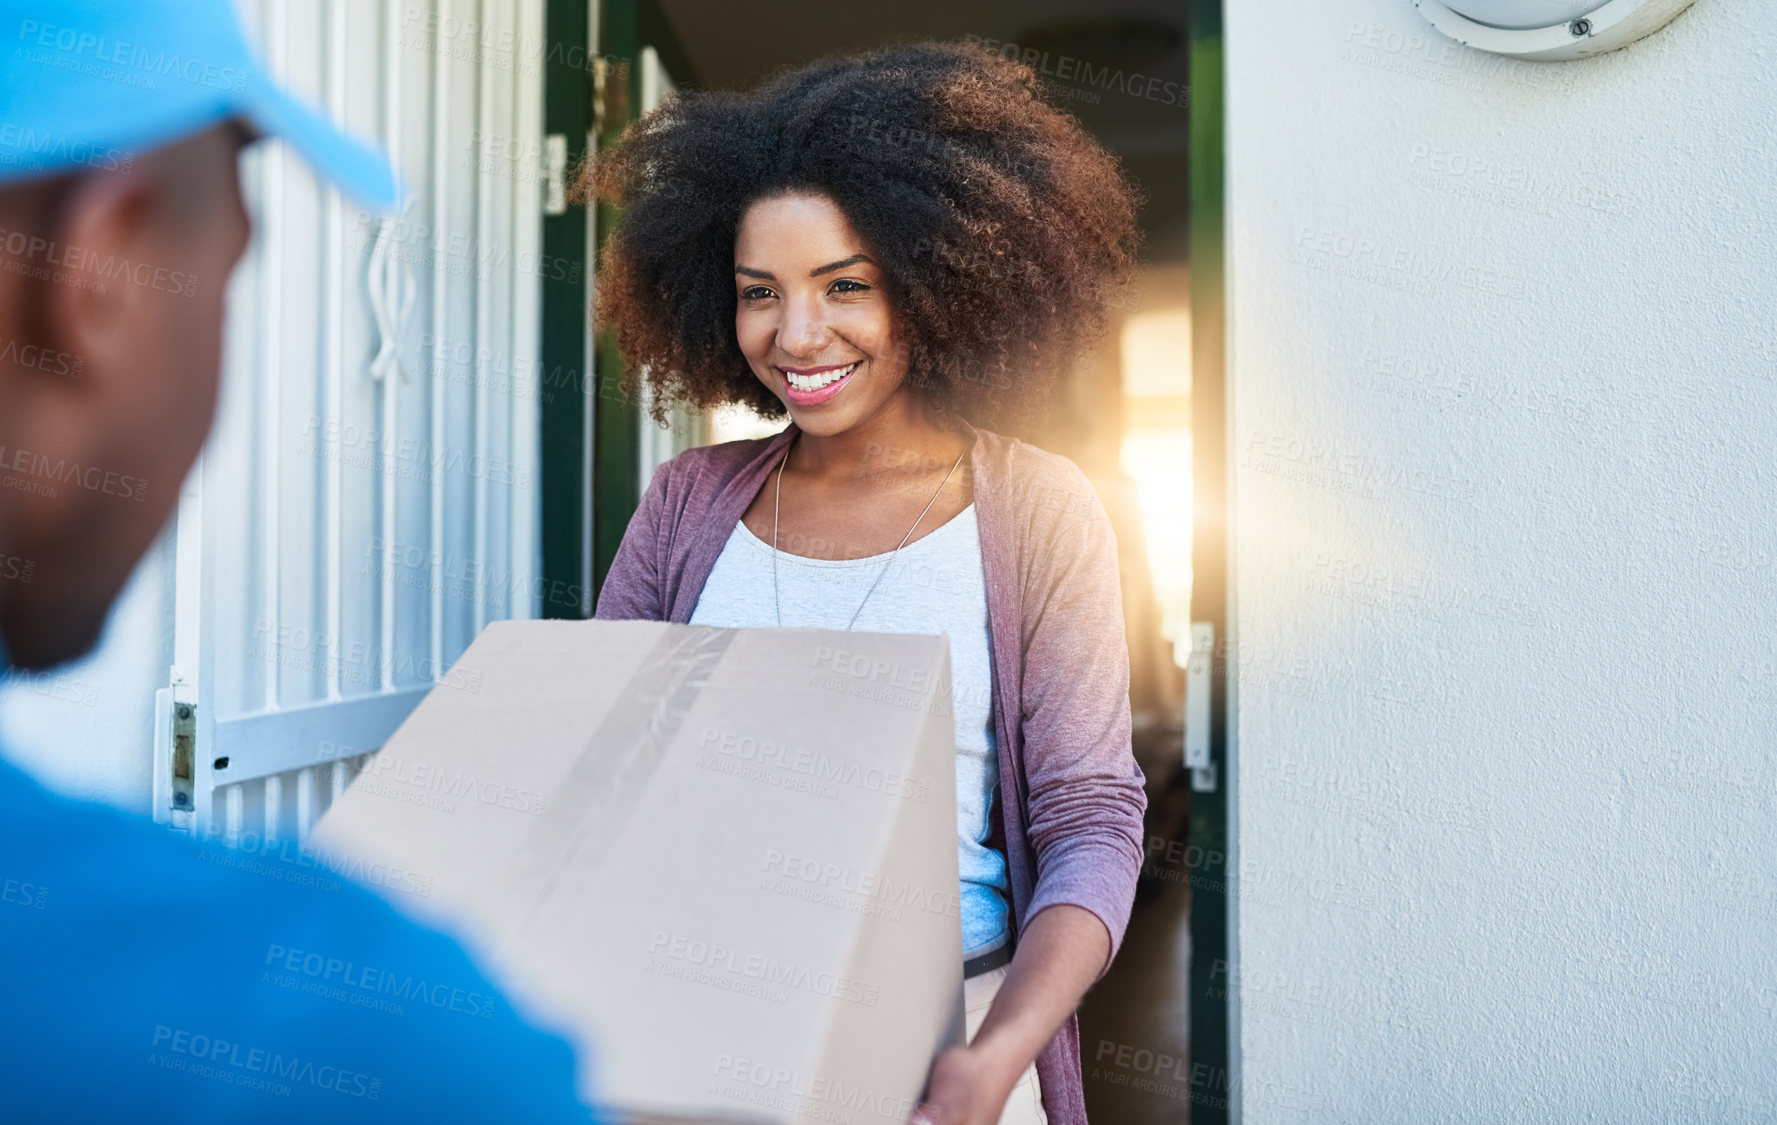 Buy stock photo Shot of a postal worker delivering a package to a young female customer